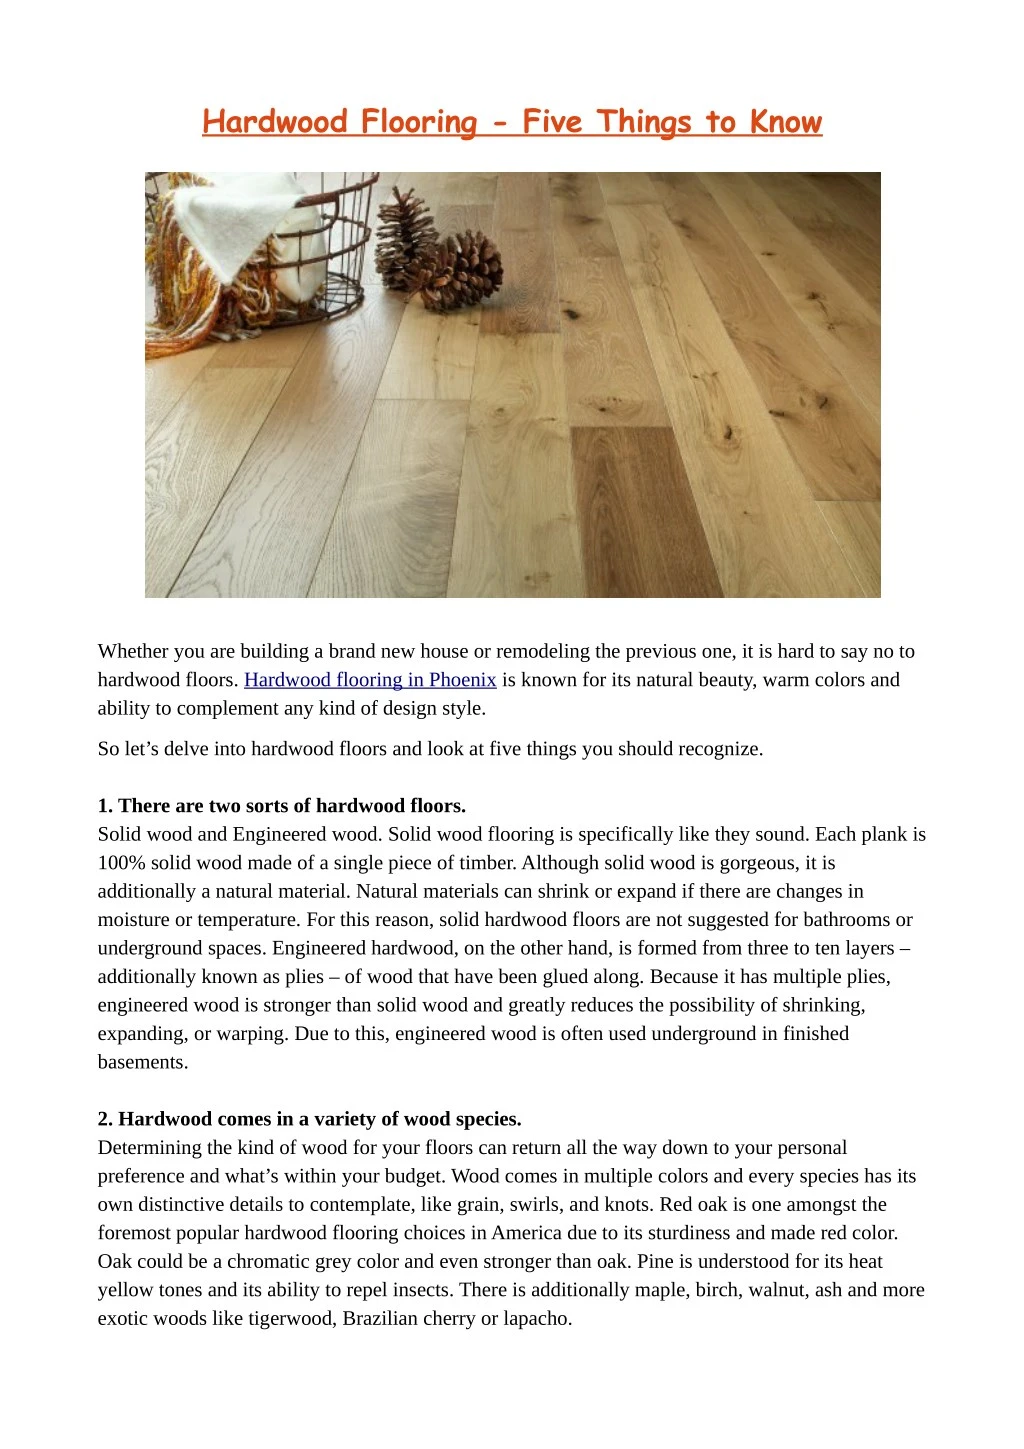 hardwood flooring five things to know